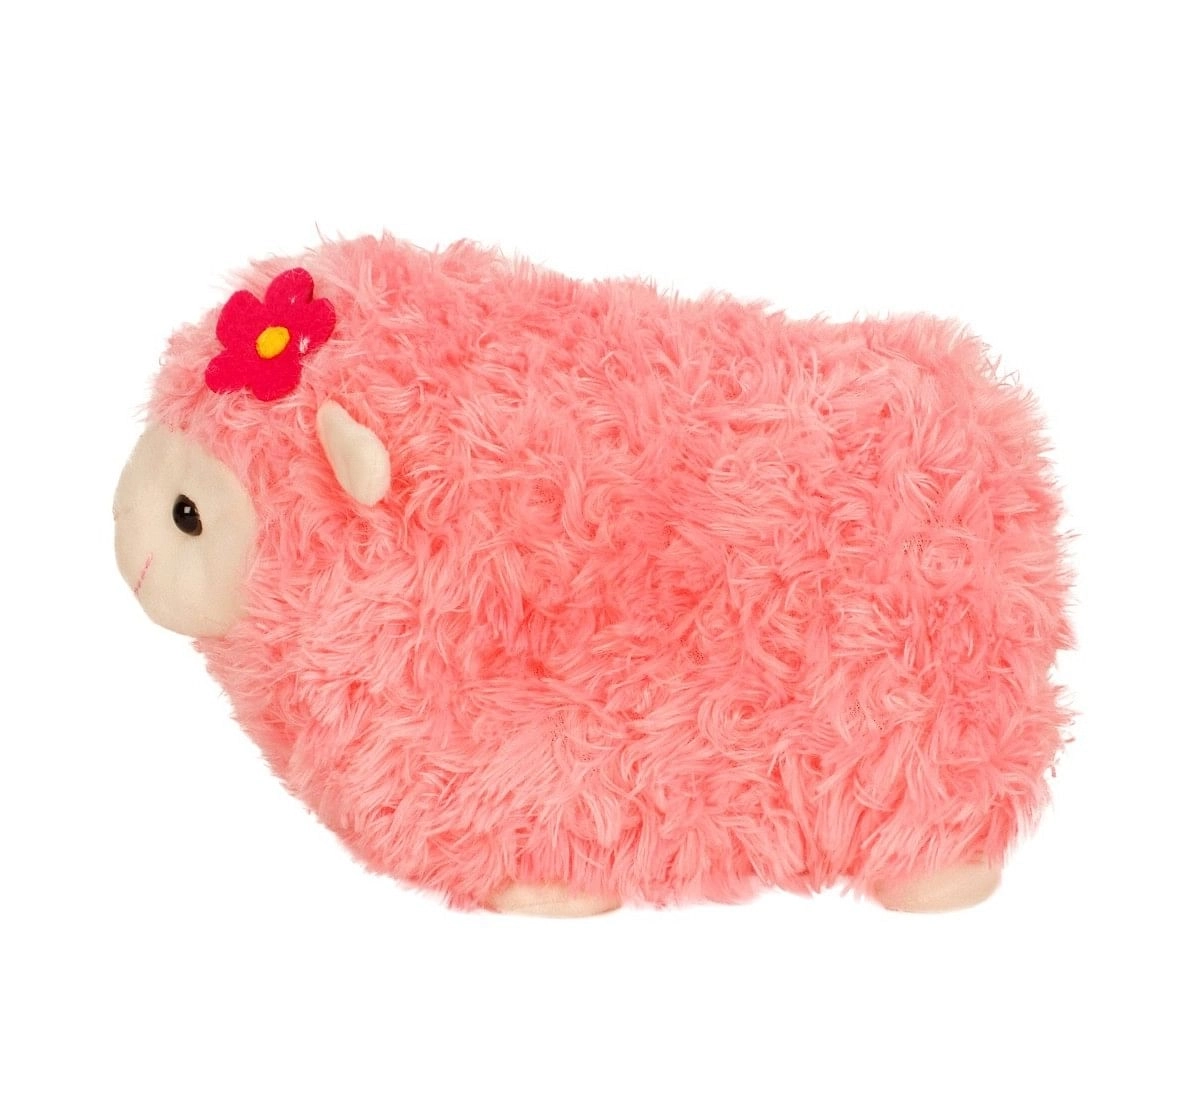 Fuzzbuzz Pink Lamb Stuffed Animal - 28Cm Quirky Soft Toys for Kids age 0M+ - 20 Cm (Pink)